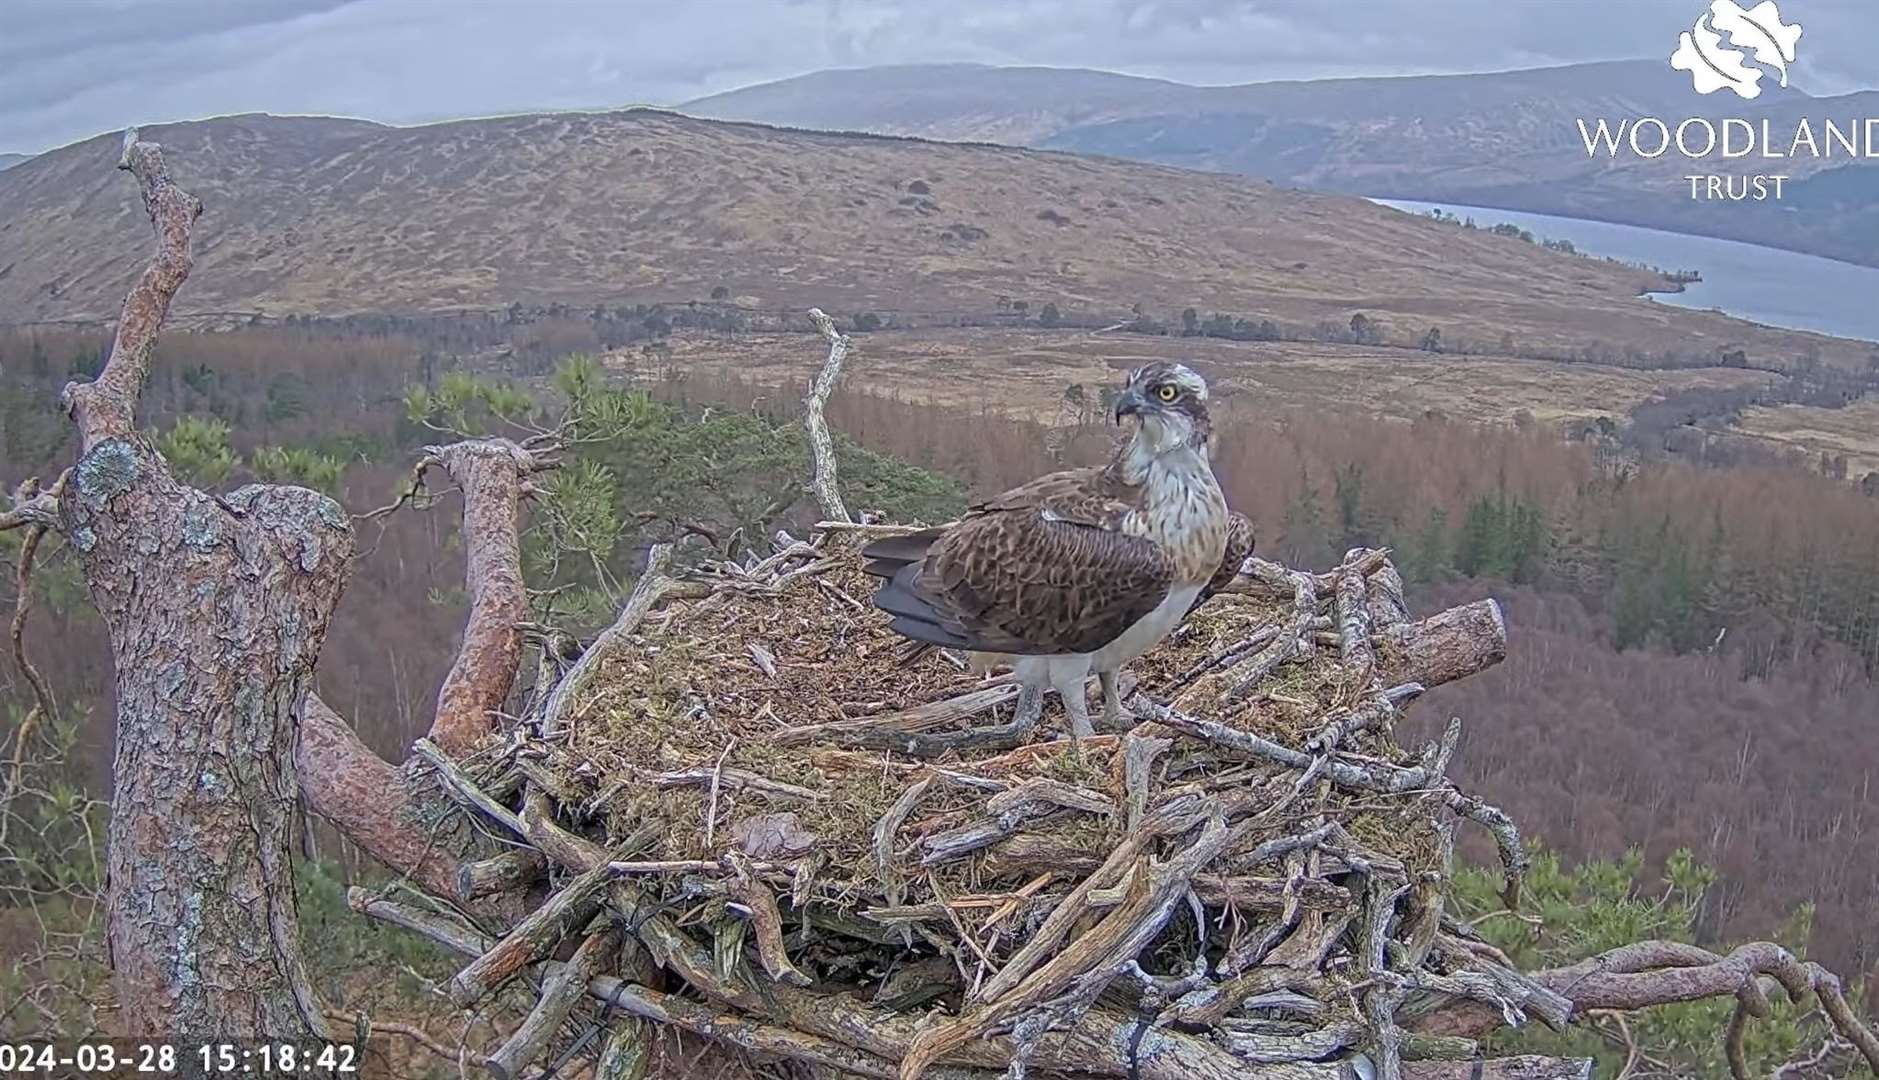 Louis returned to the nest earlier in the spring (Woodland Trust Scotland/PA)